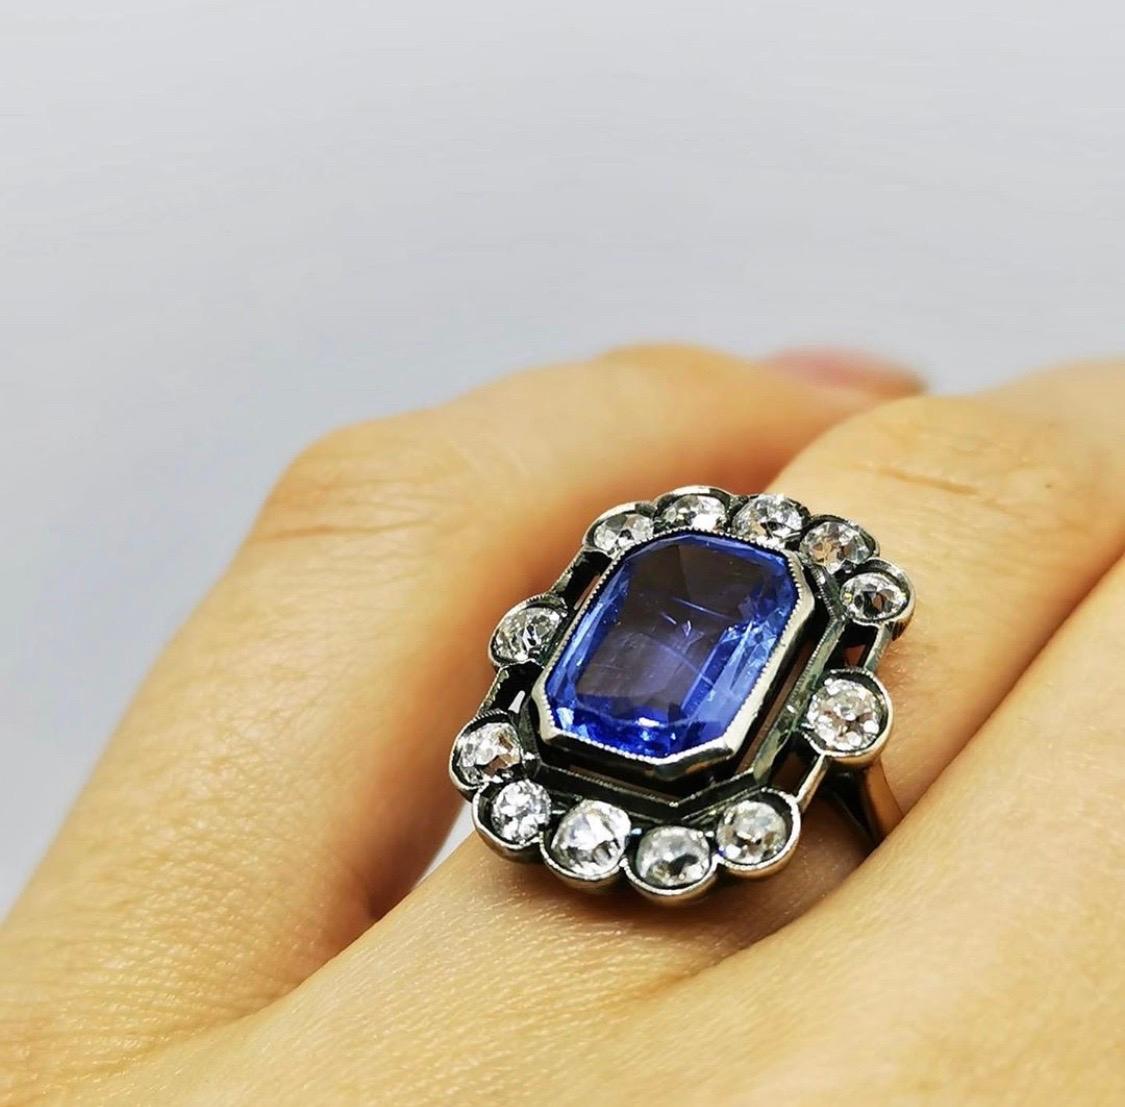 Vintage blue Sapphire and Diamonds Ring

This stunning yellow gold ring is centered with blue octagonal cut sapphire that weighs approximately 4.0ct . The sapphire is accentuated by 12 sparkling old cut diamonds that weigh approximately 1.80ct.
The